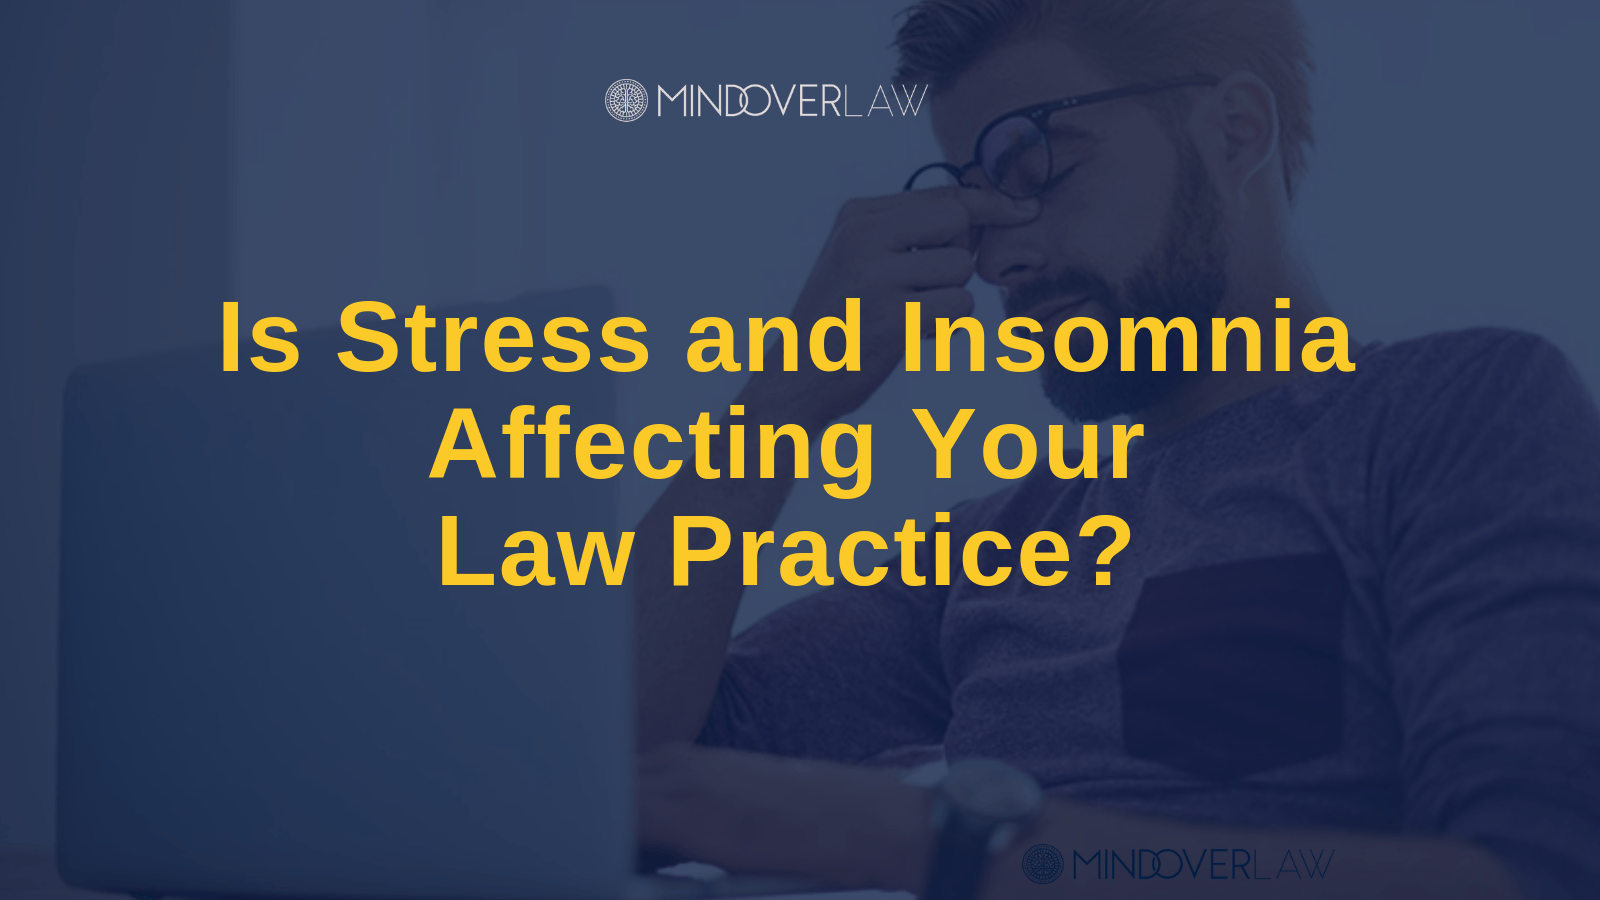 Is Stress and Insomnia Affecting Your Law Practice - mind over law